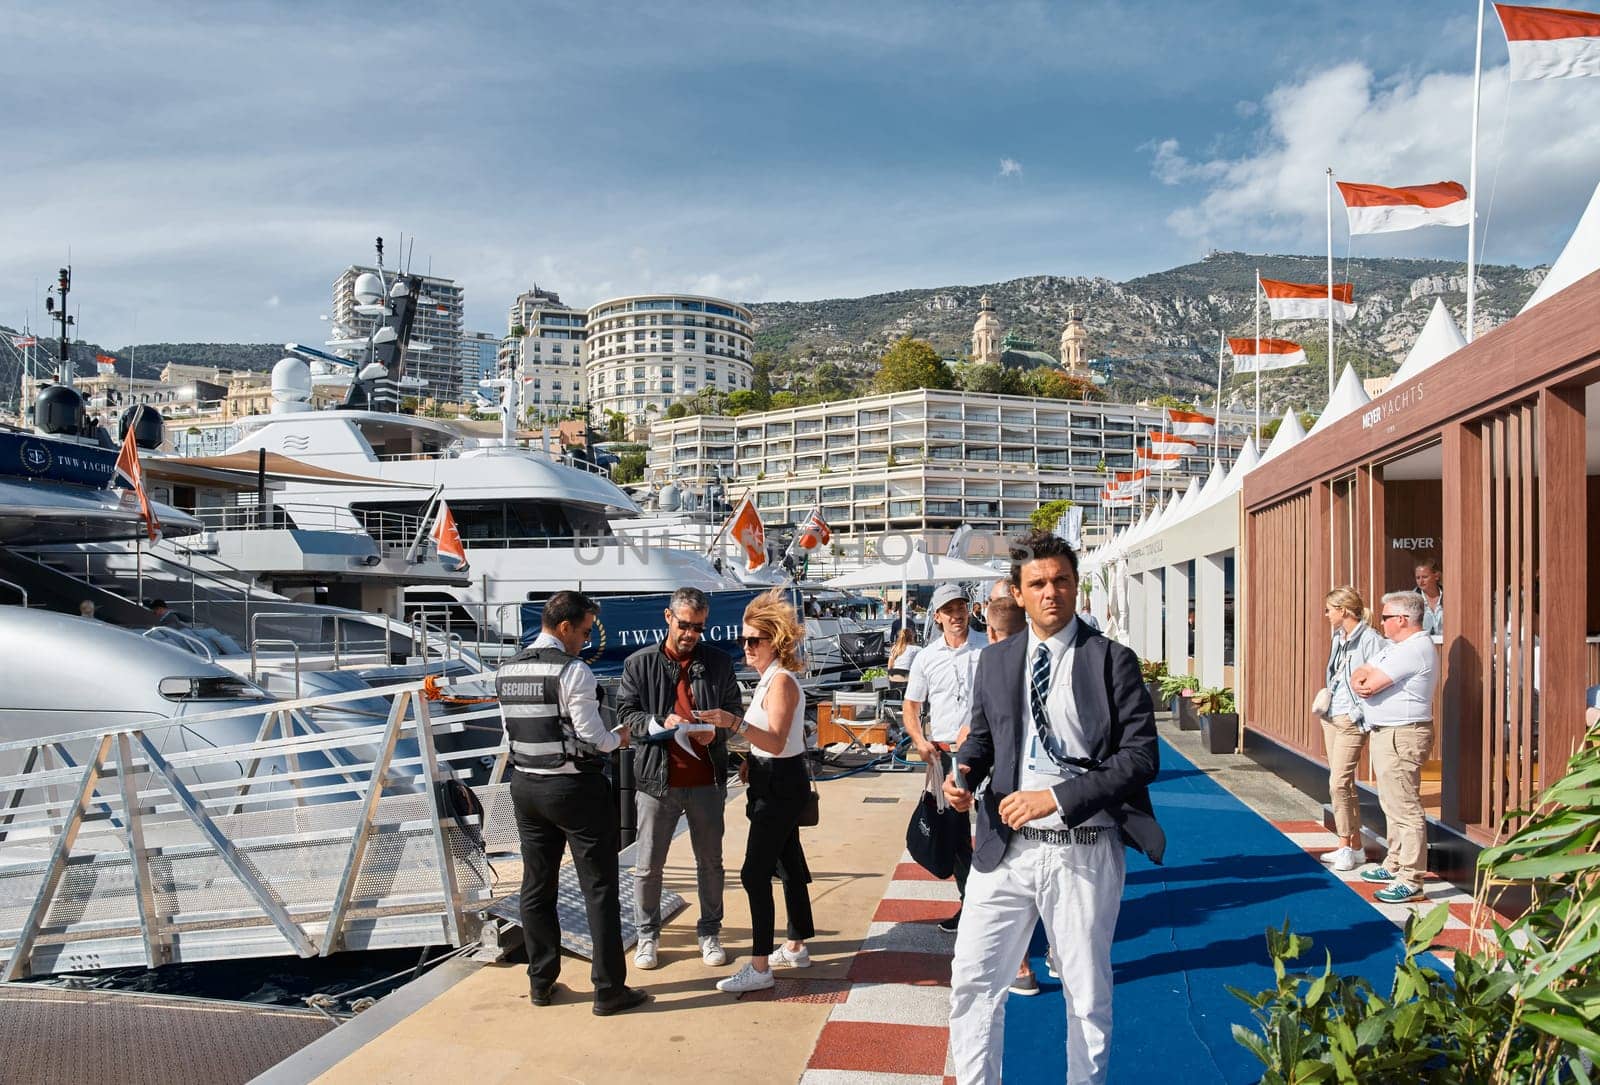 Monaco, Monte Carlo, 29 September 2022 - a lot of people, clients and yacht brokers look at the mega yachts presented, discuss the novelties of the boating industry at the famous motorboat exhibition by vladimirdrozdin